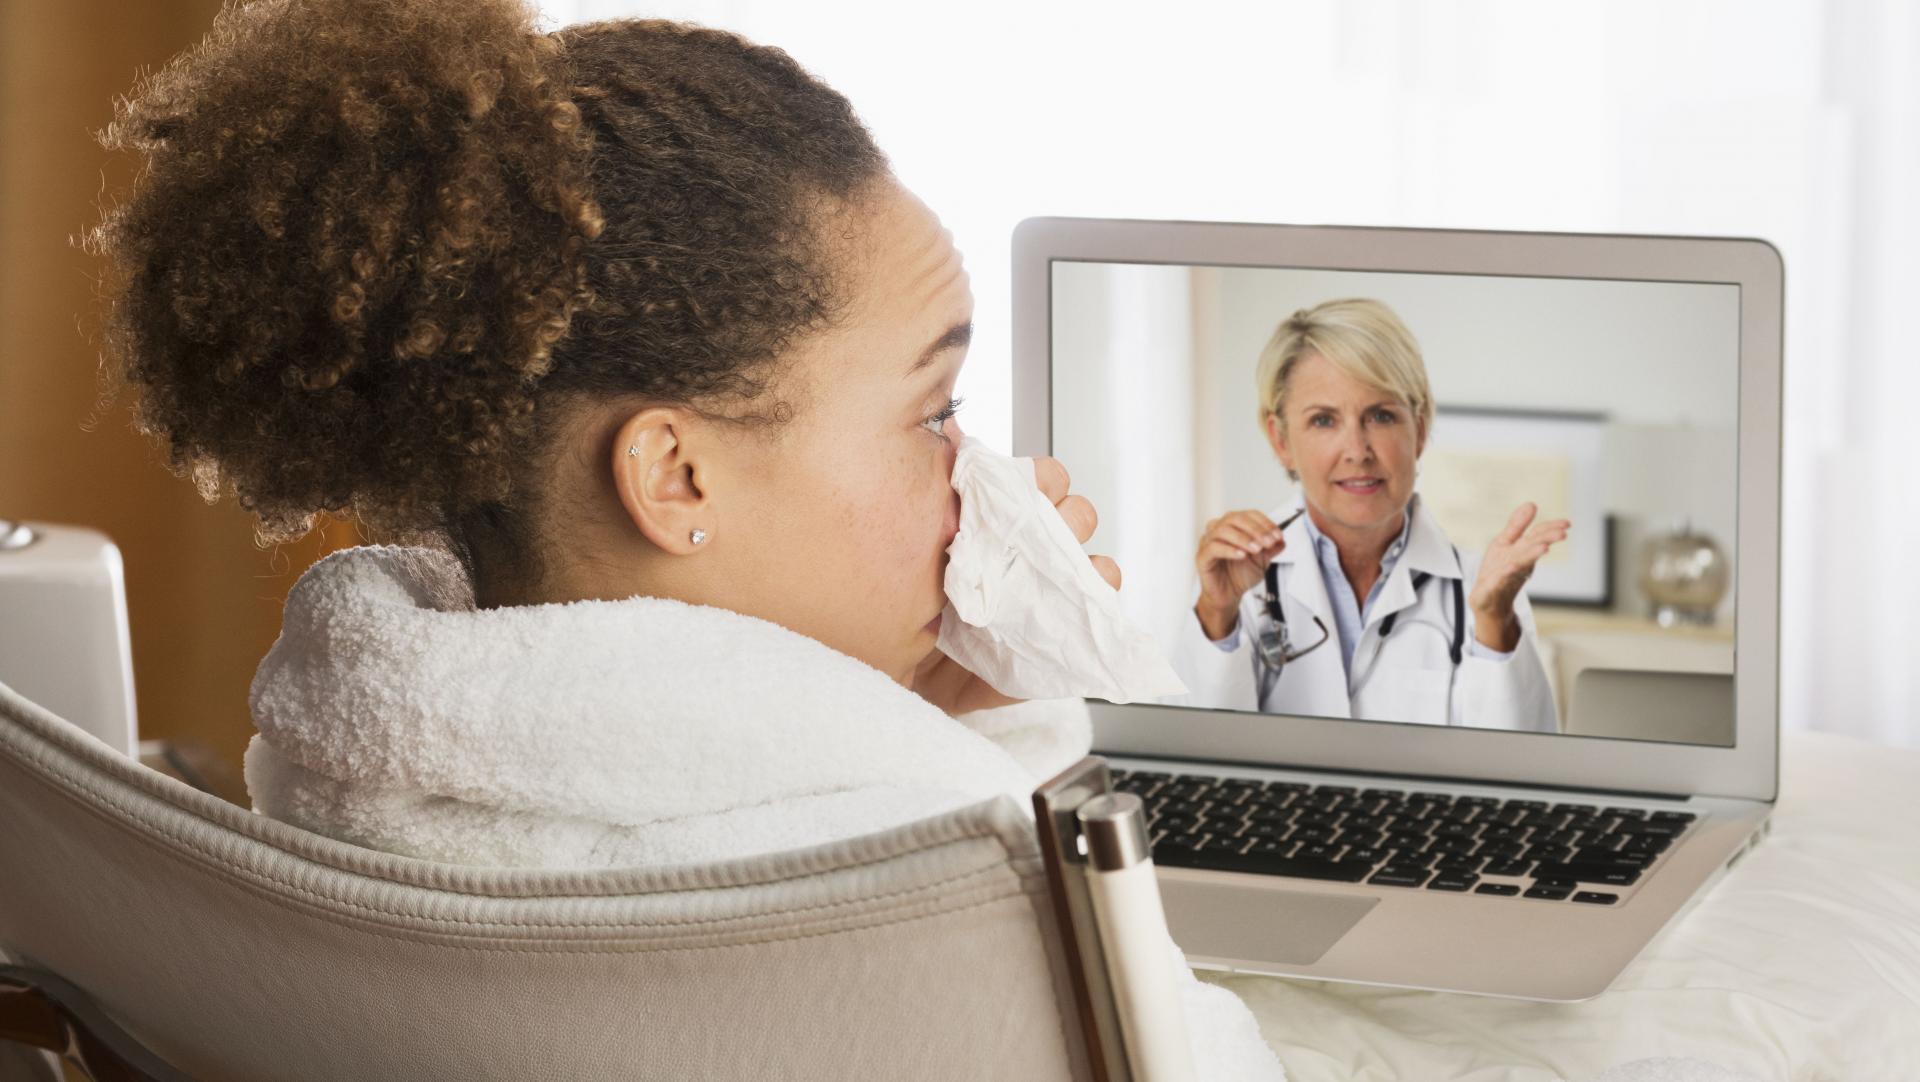 Patient with a cold having a video chat with a health provider from home